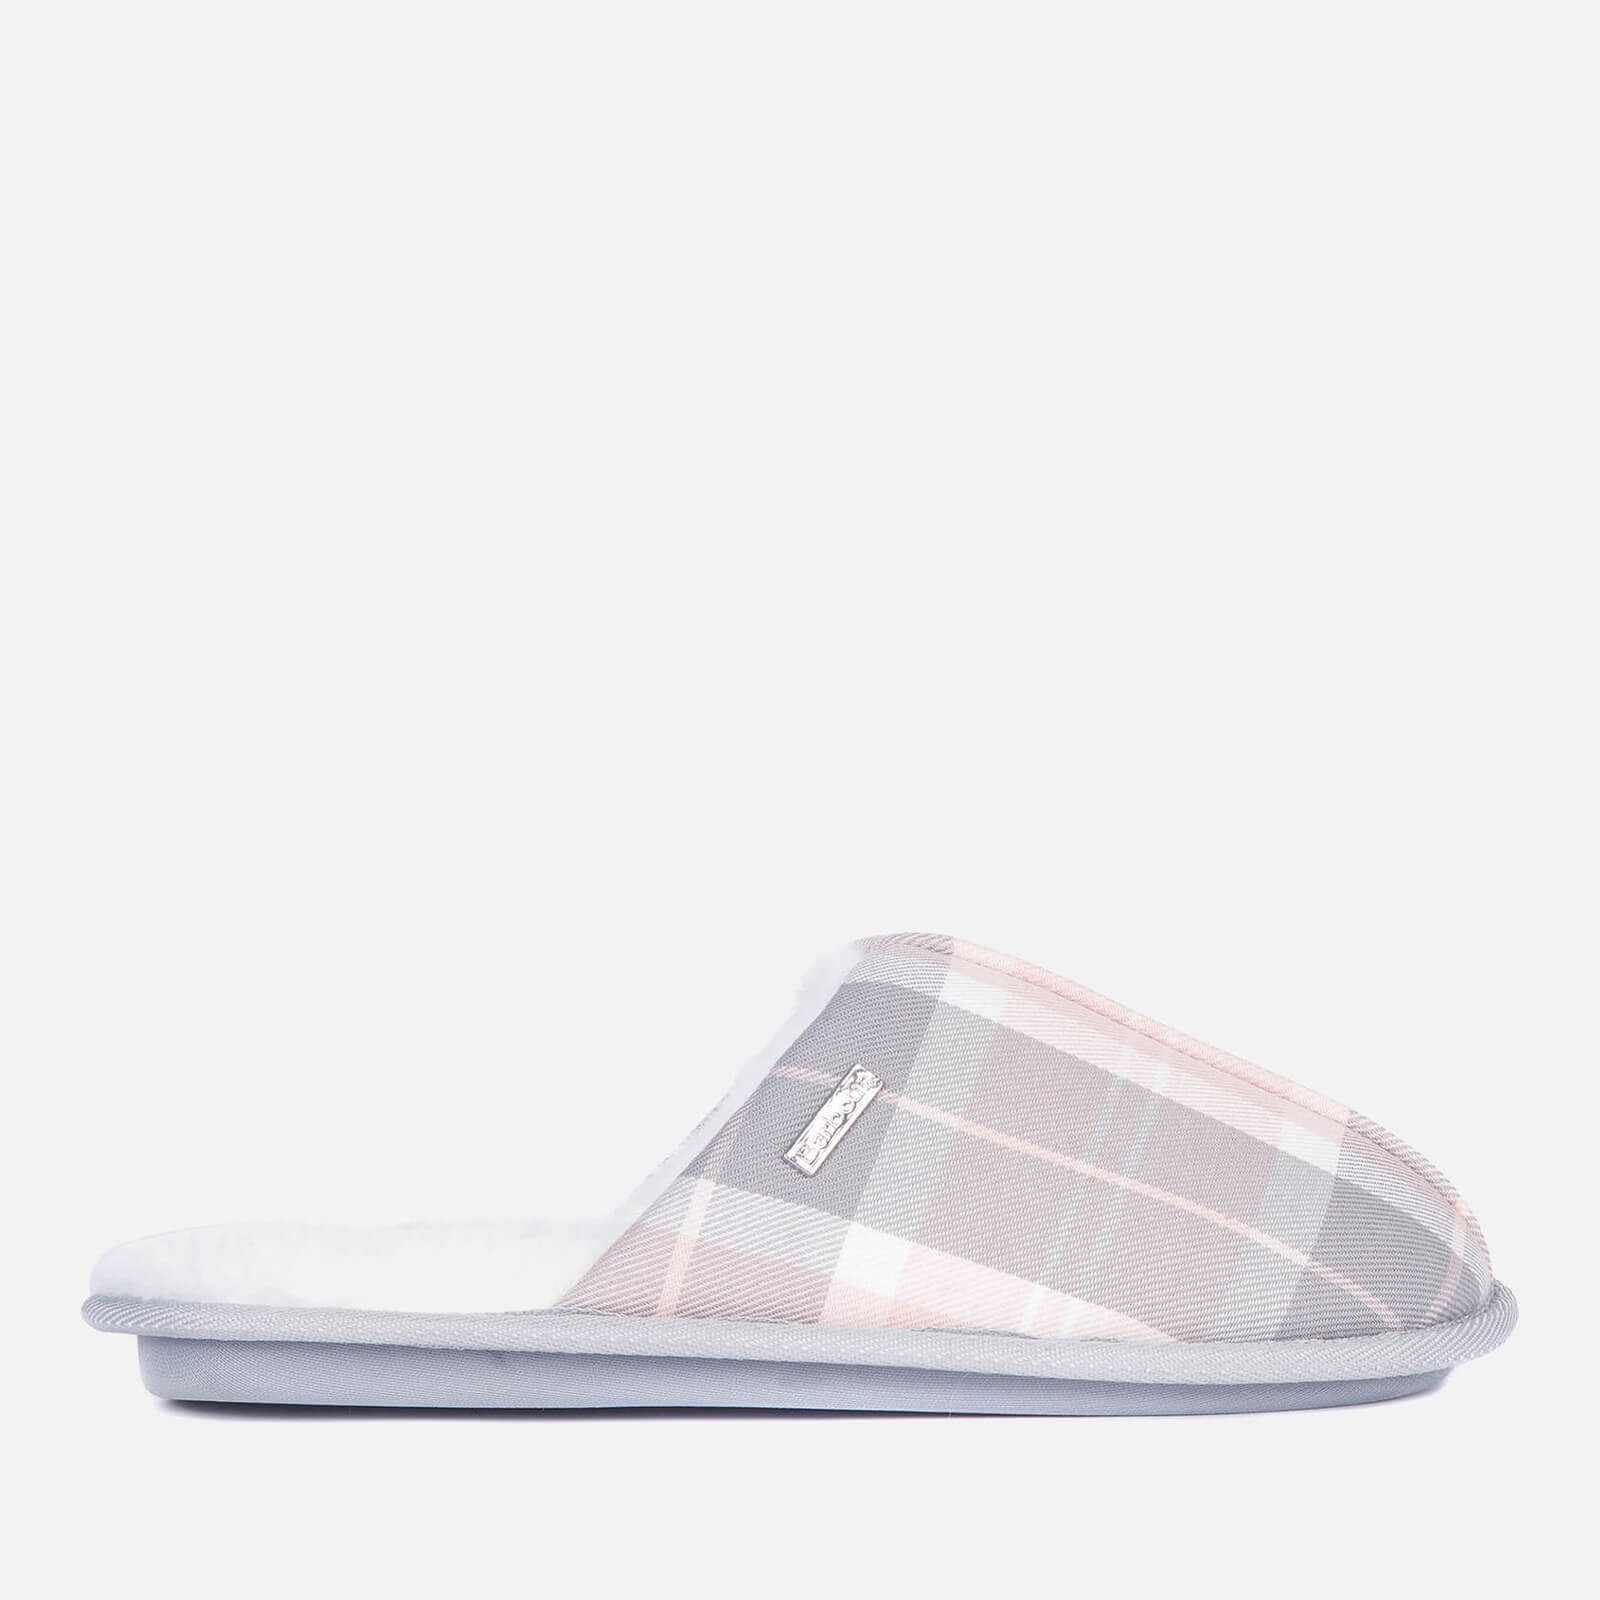 Barbour Women's Maddie Slippers - Recycled Pink/Grey Tartan - UK 5 product